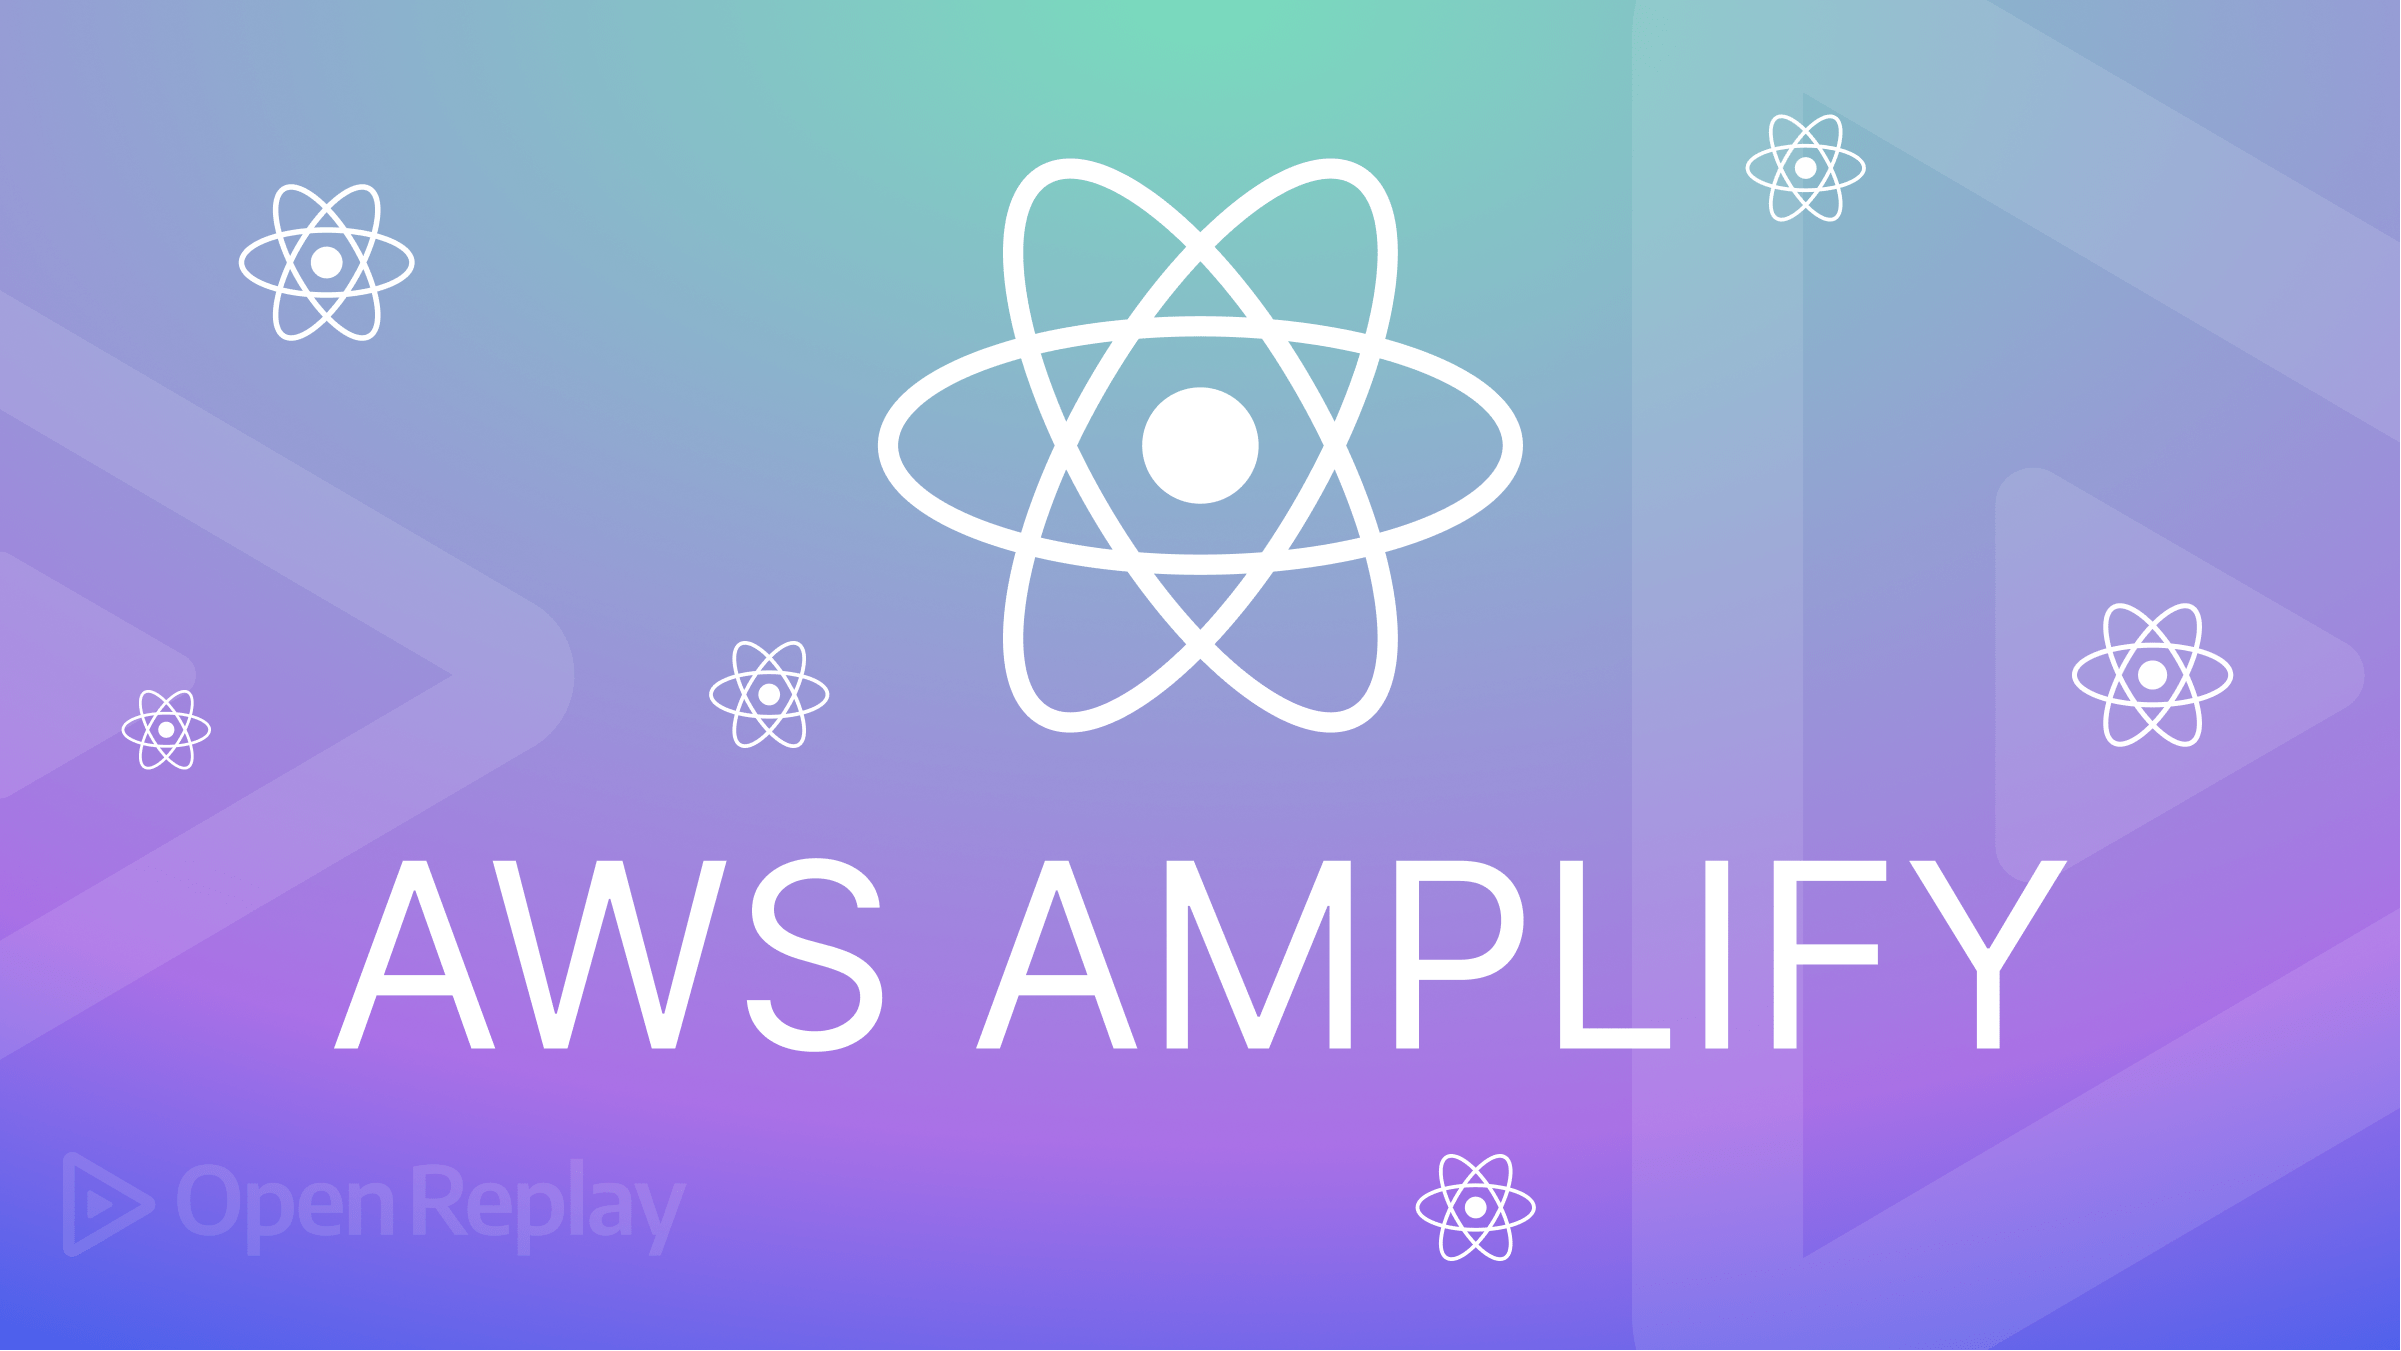 Step by step: build and deploy a serverless React app with AWS Amplify